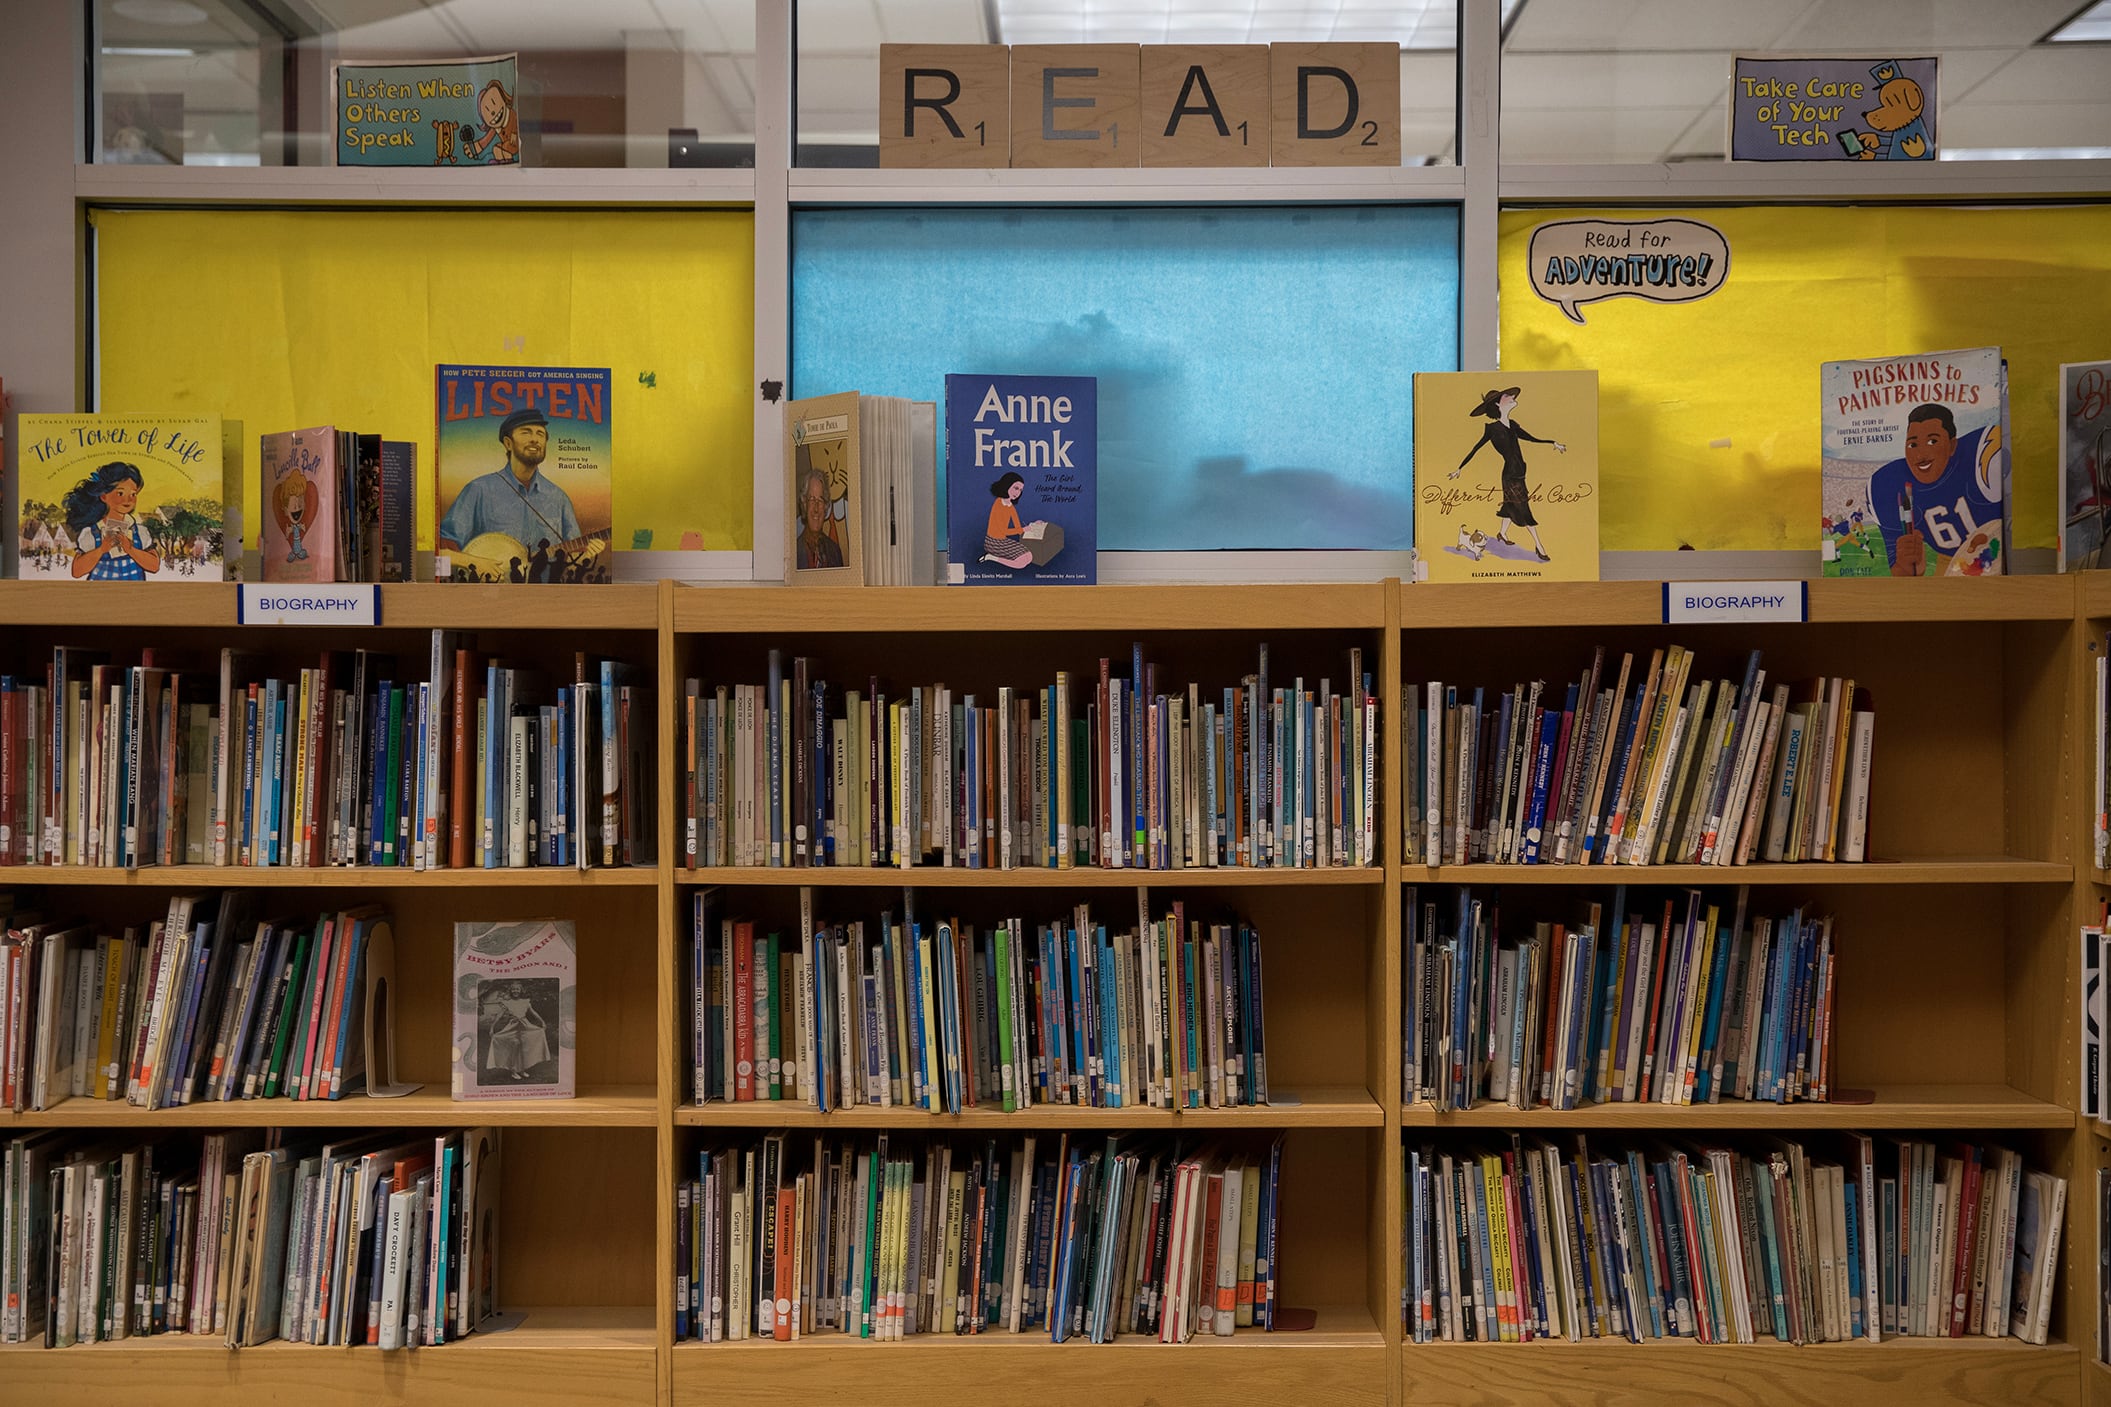 A bookshelf full of books line a wall with windows covered in yellow and blue paper above the bookshelf. There is a sign that says "READ" above the bookshelf.